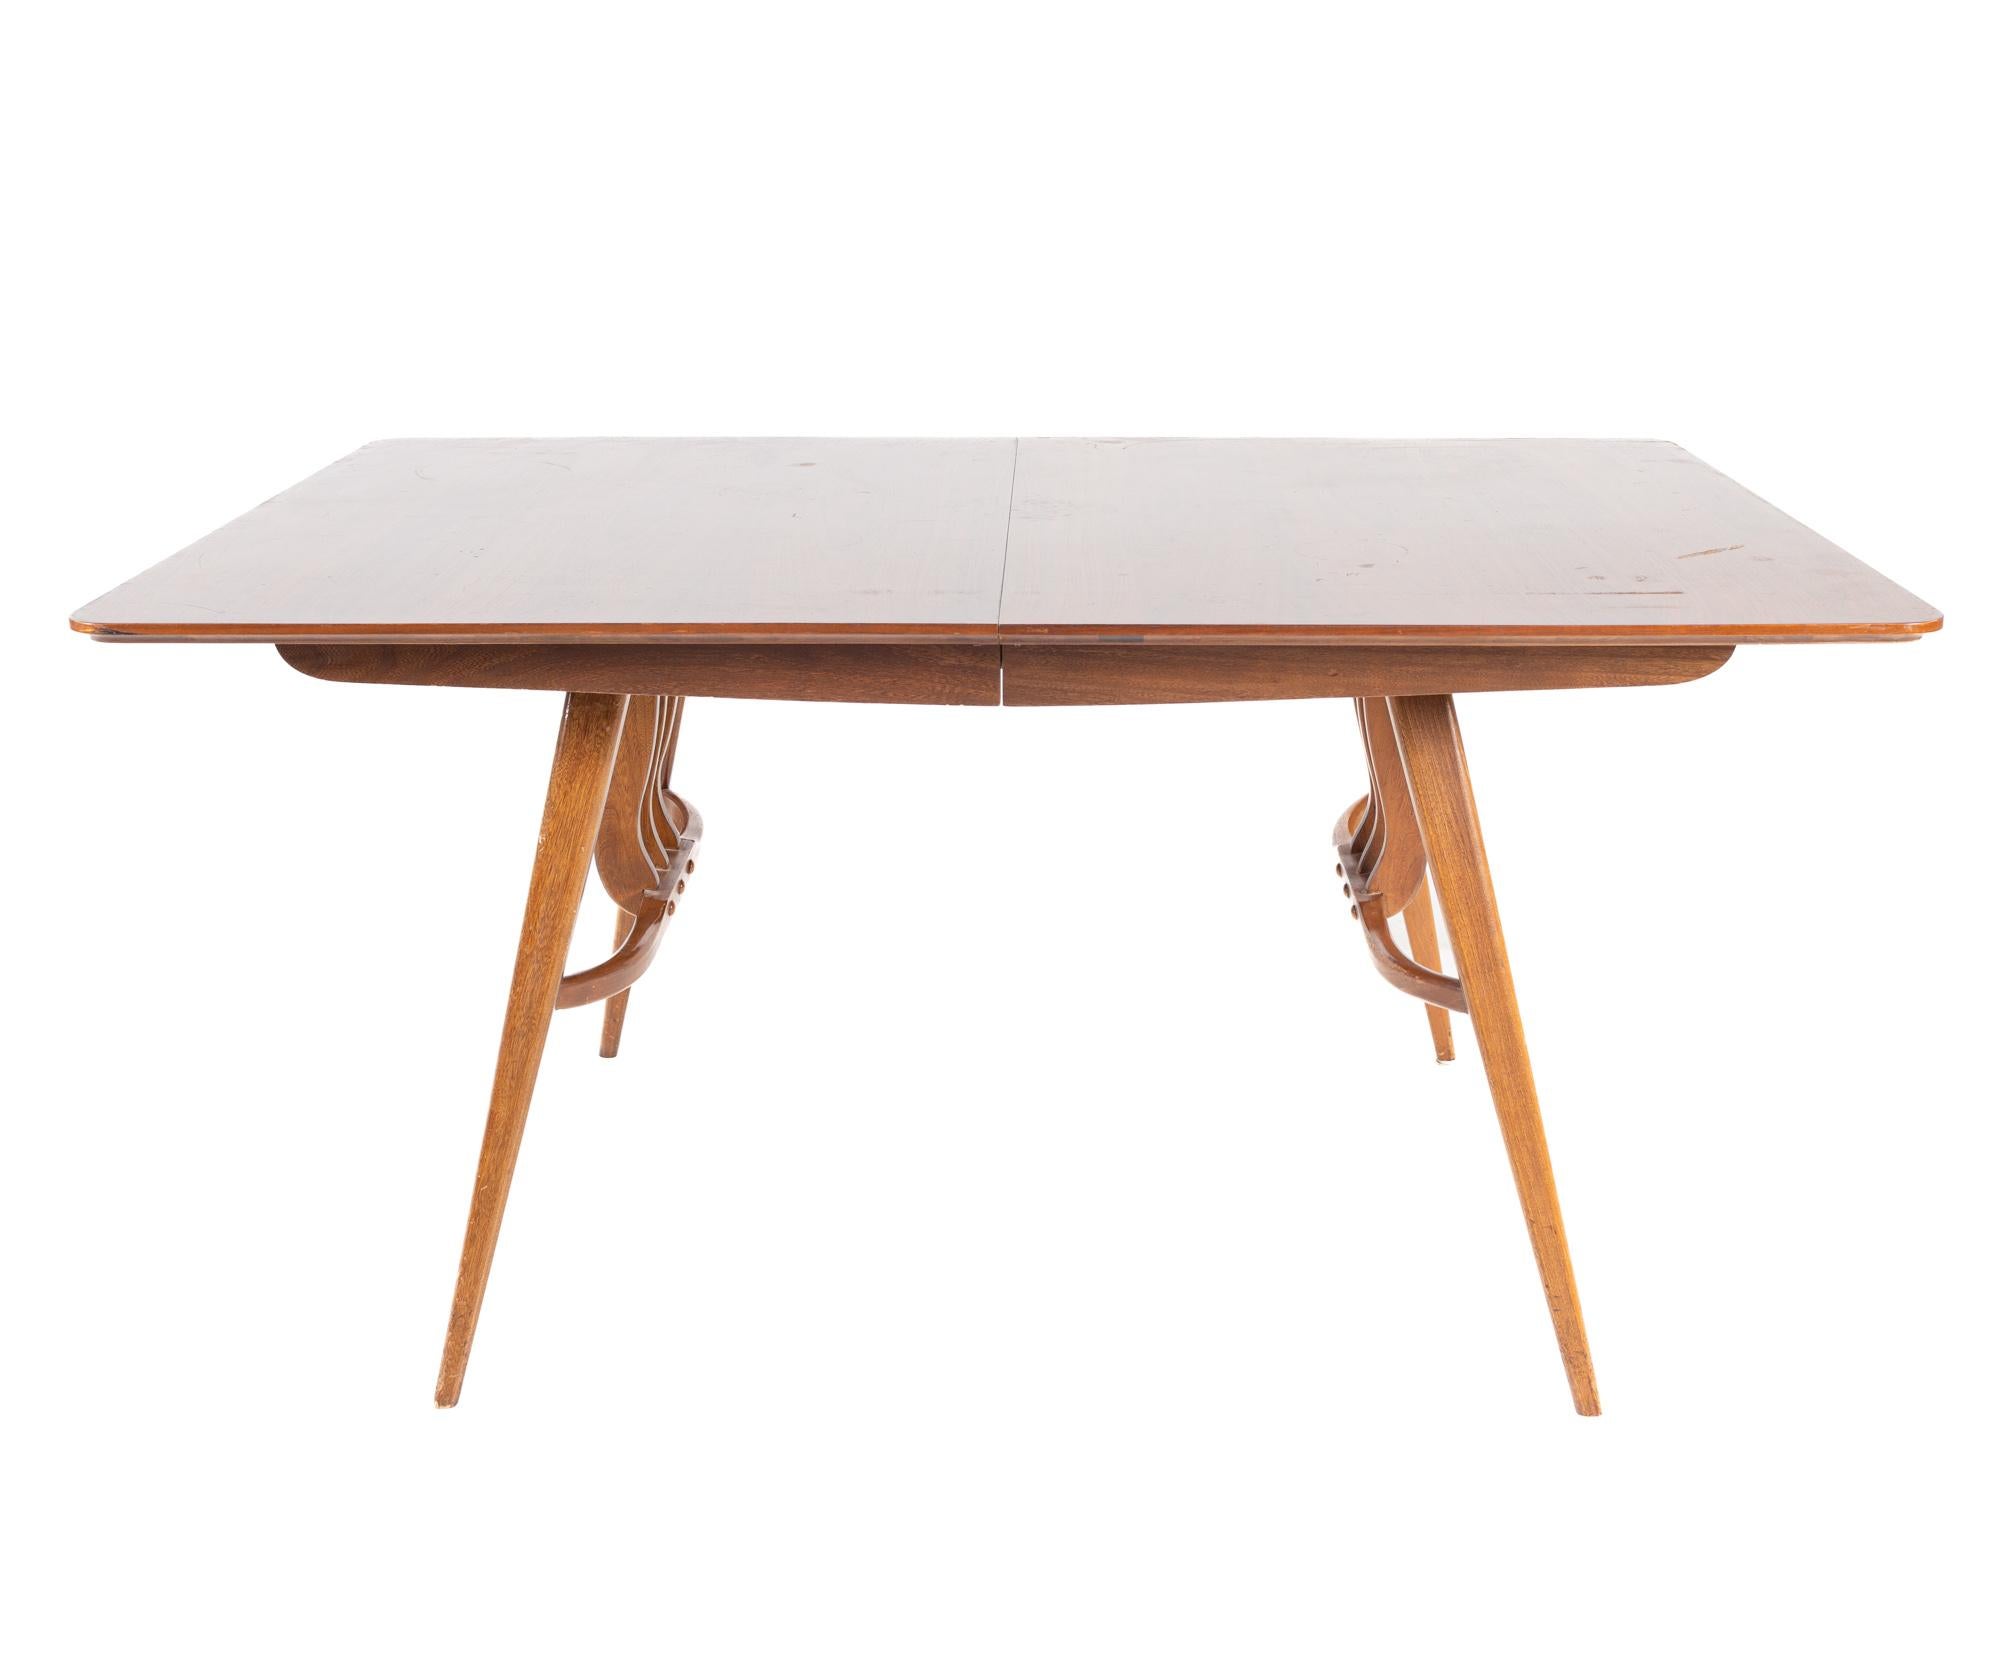 Blowing rock mid-century walnut dining table

This table measures: 60 wide x 42 deep x 30 inches high, with a chair clearance of 26 inches

All pieces of furniture can be had in what we call restored vintage condition. That means the piece is